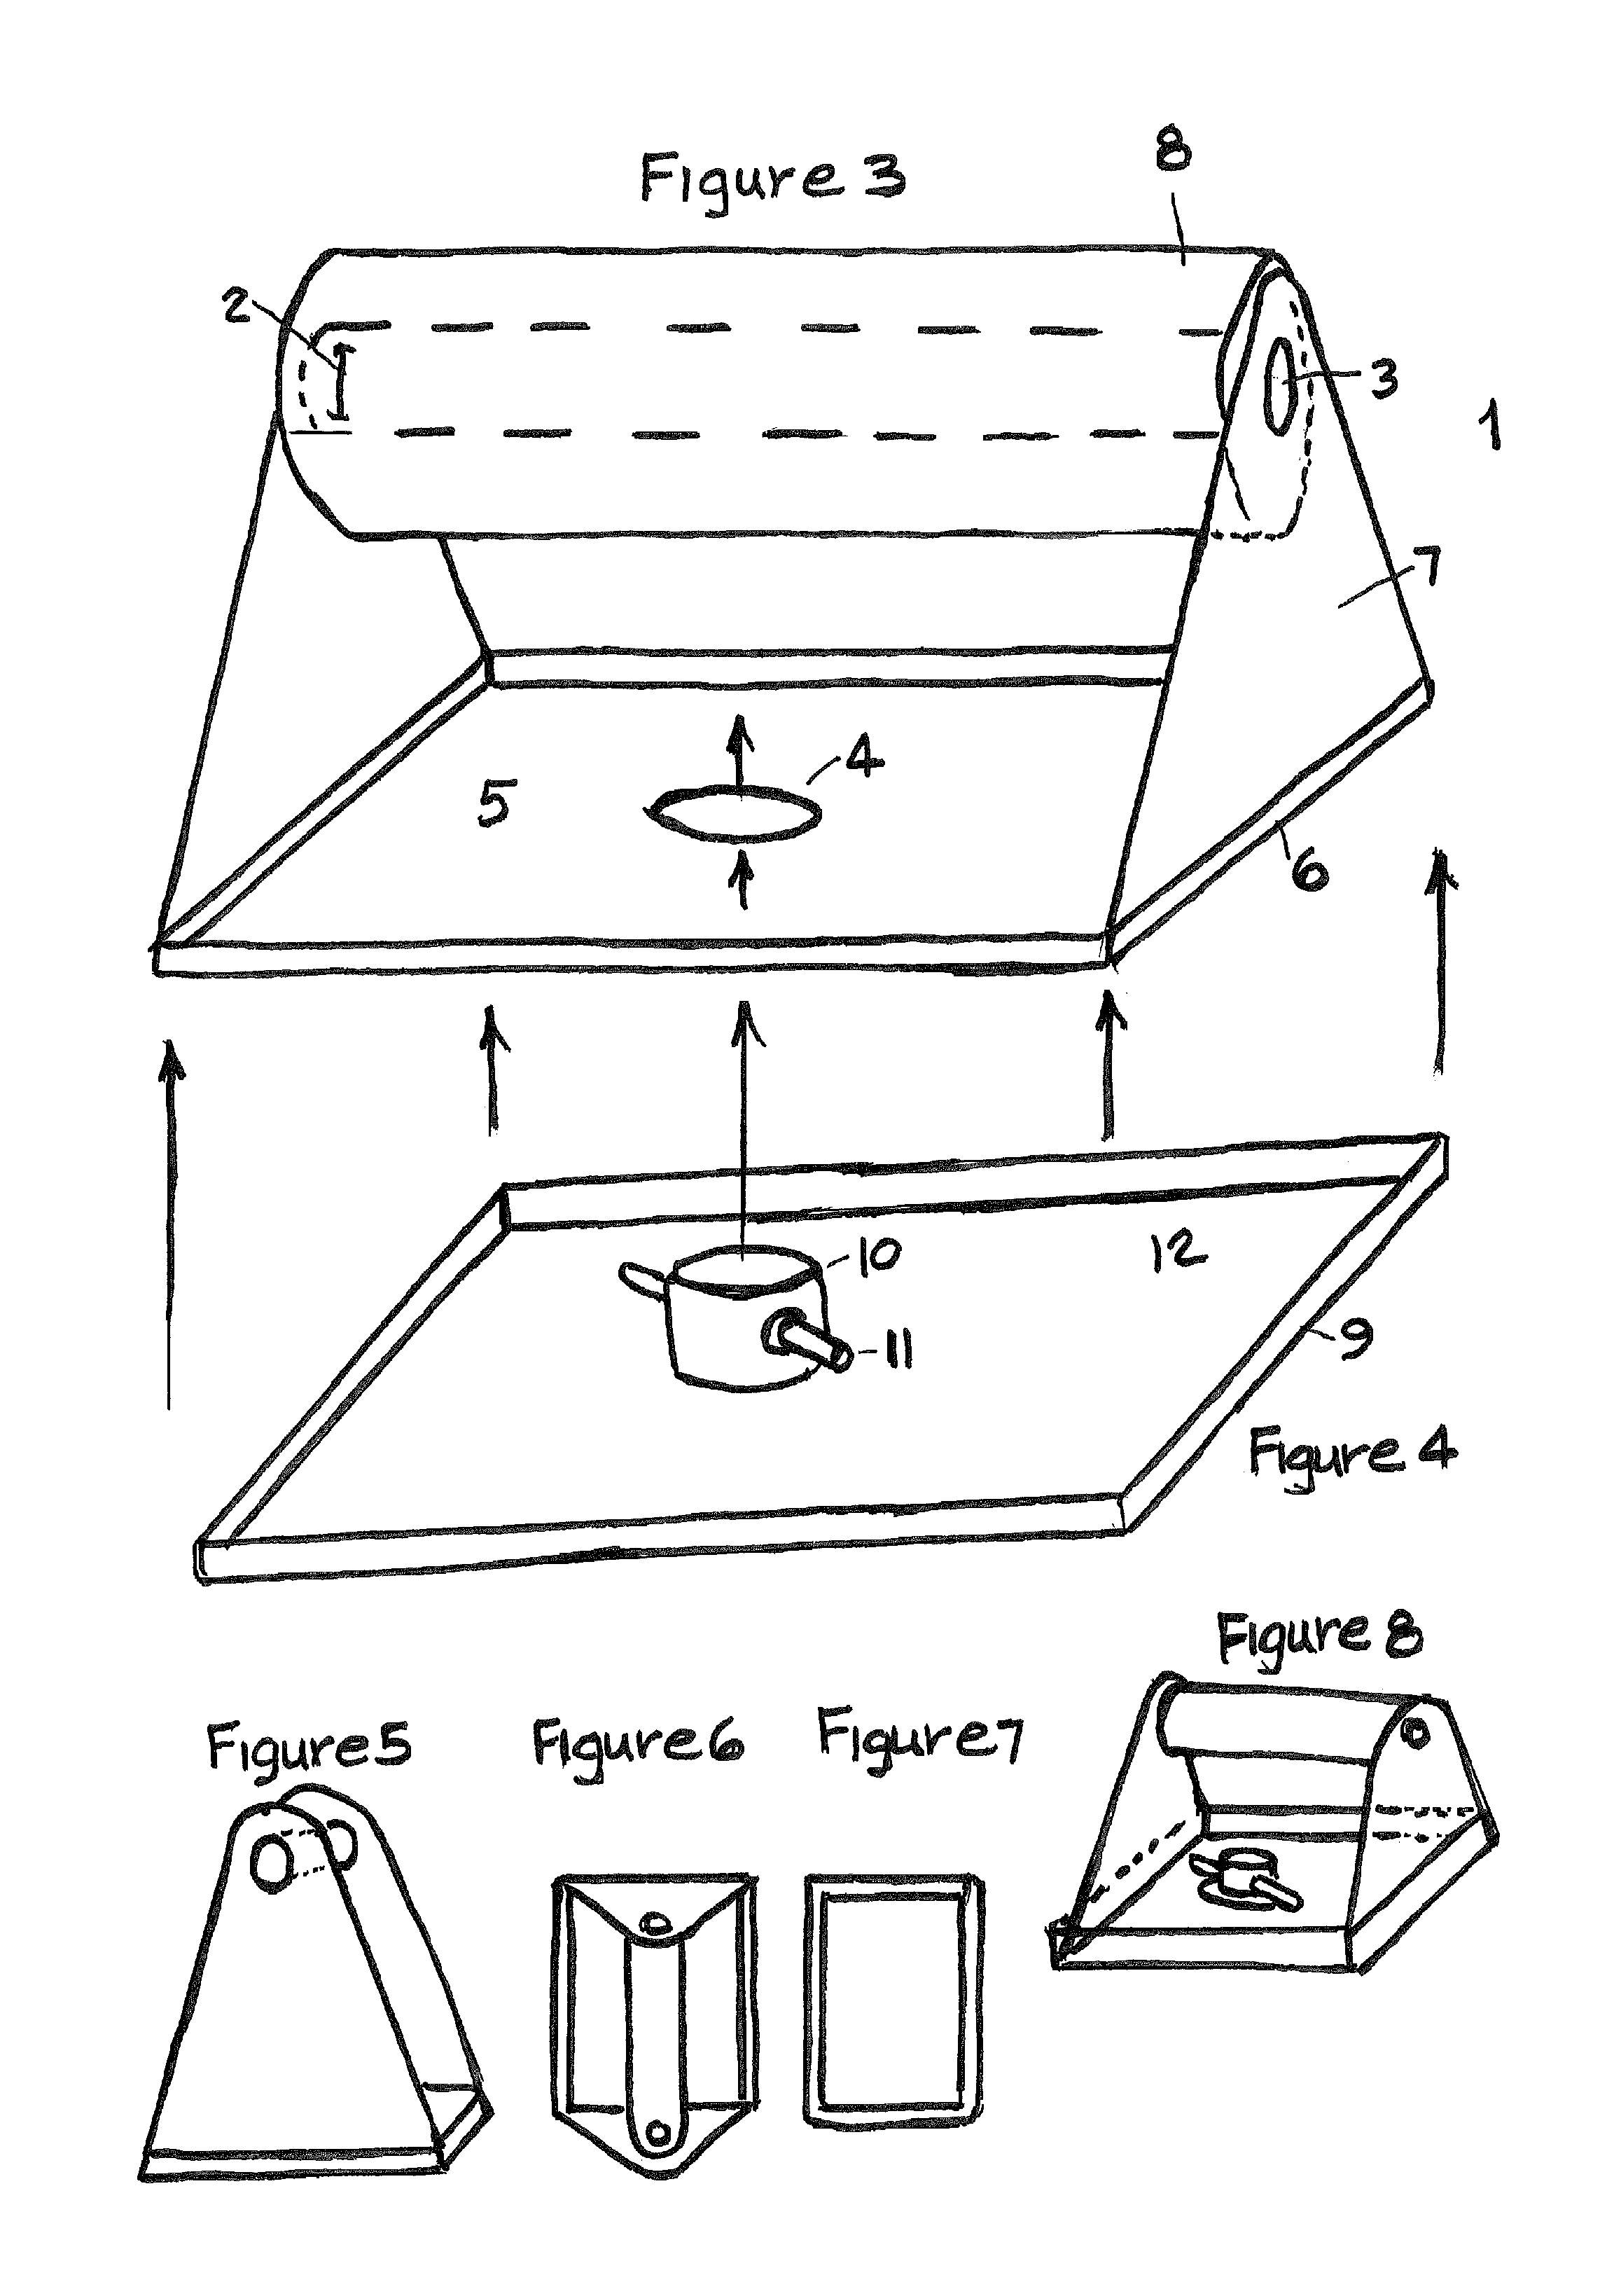 Multiple use exercise apparatus